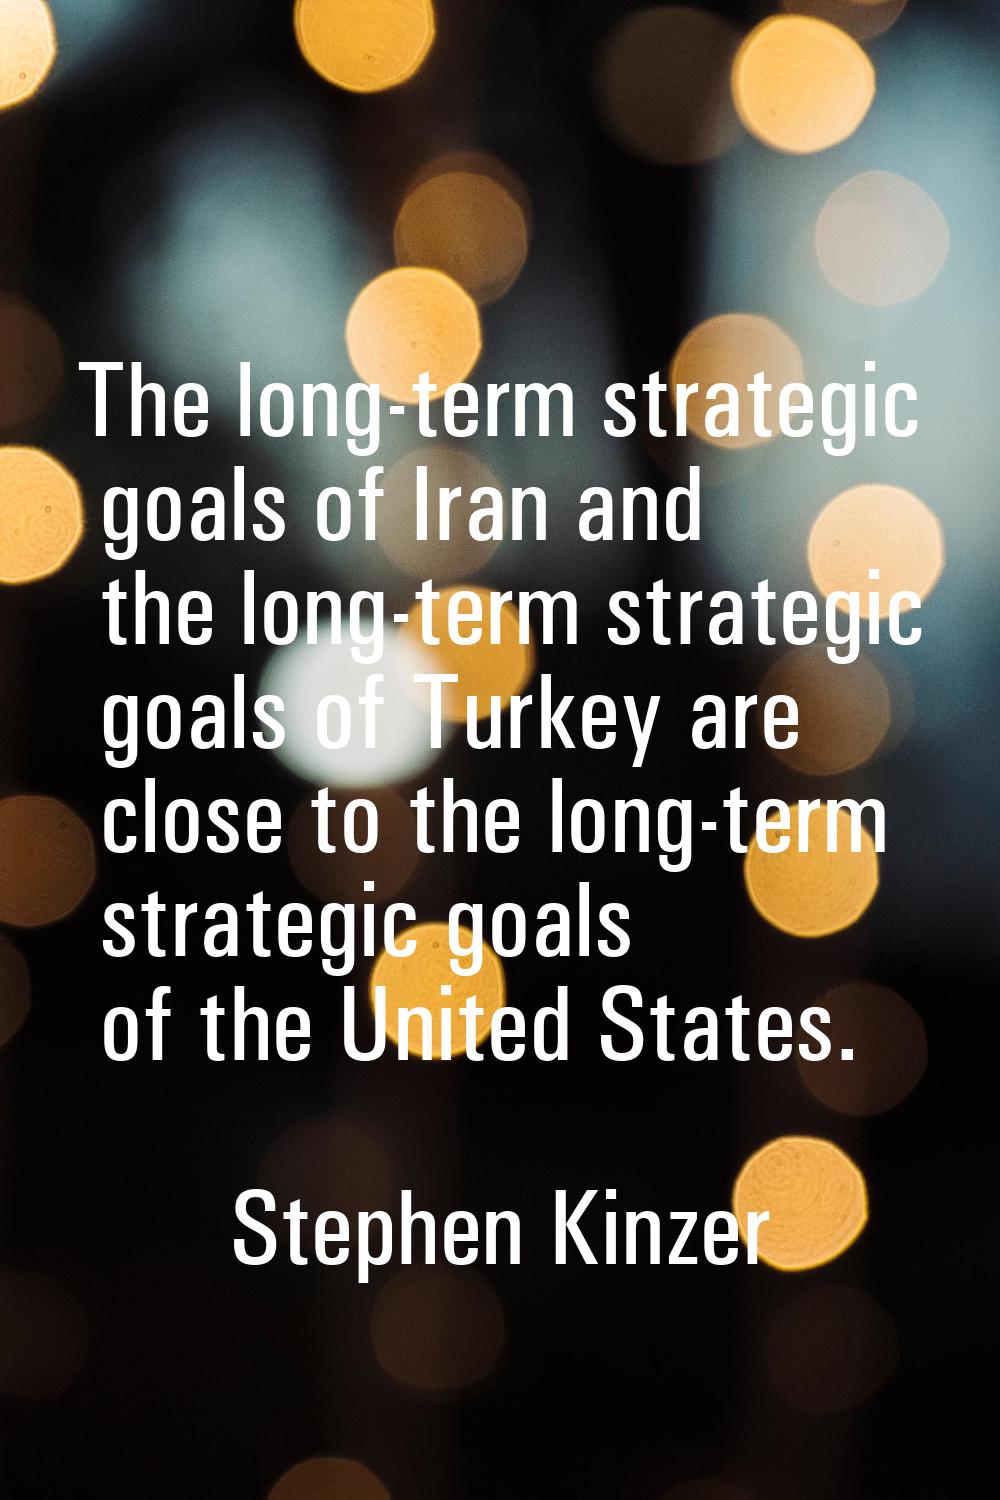 The long-term strategic goals of Iran and the long-term strategic goals of Turkey are close to the 